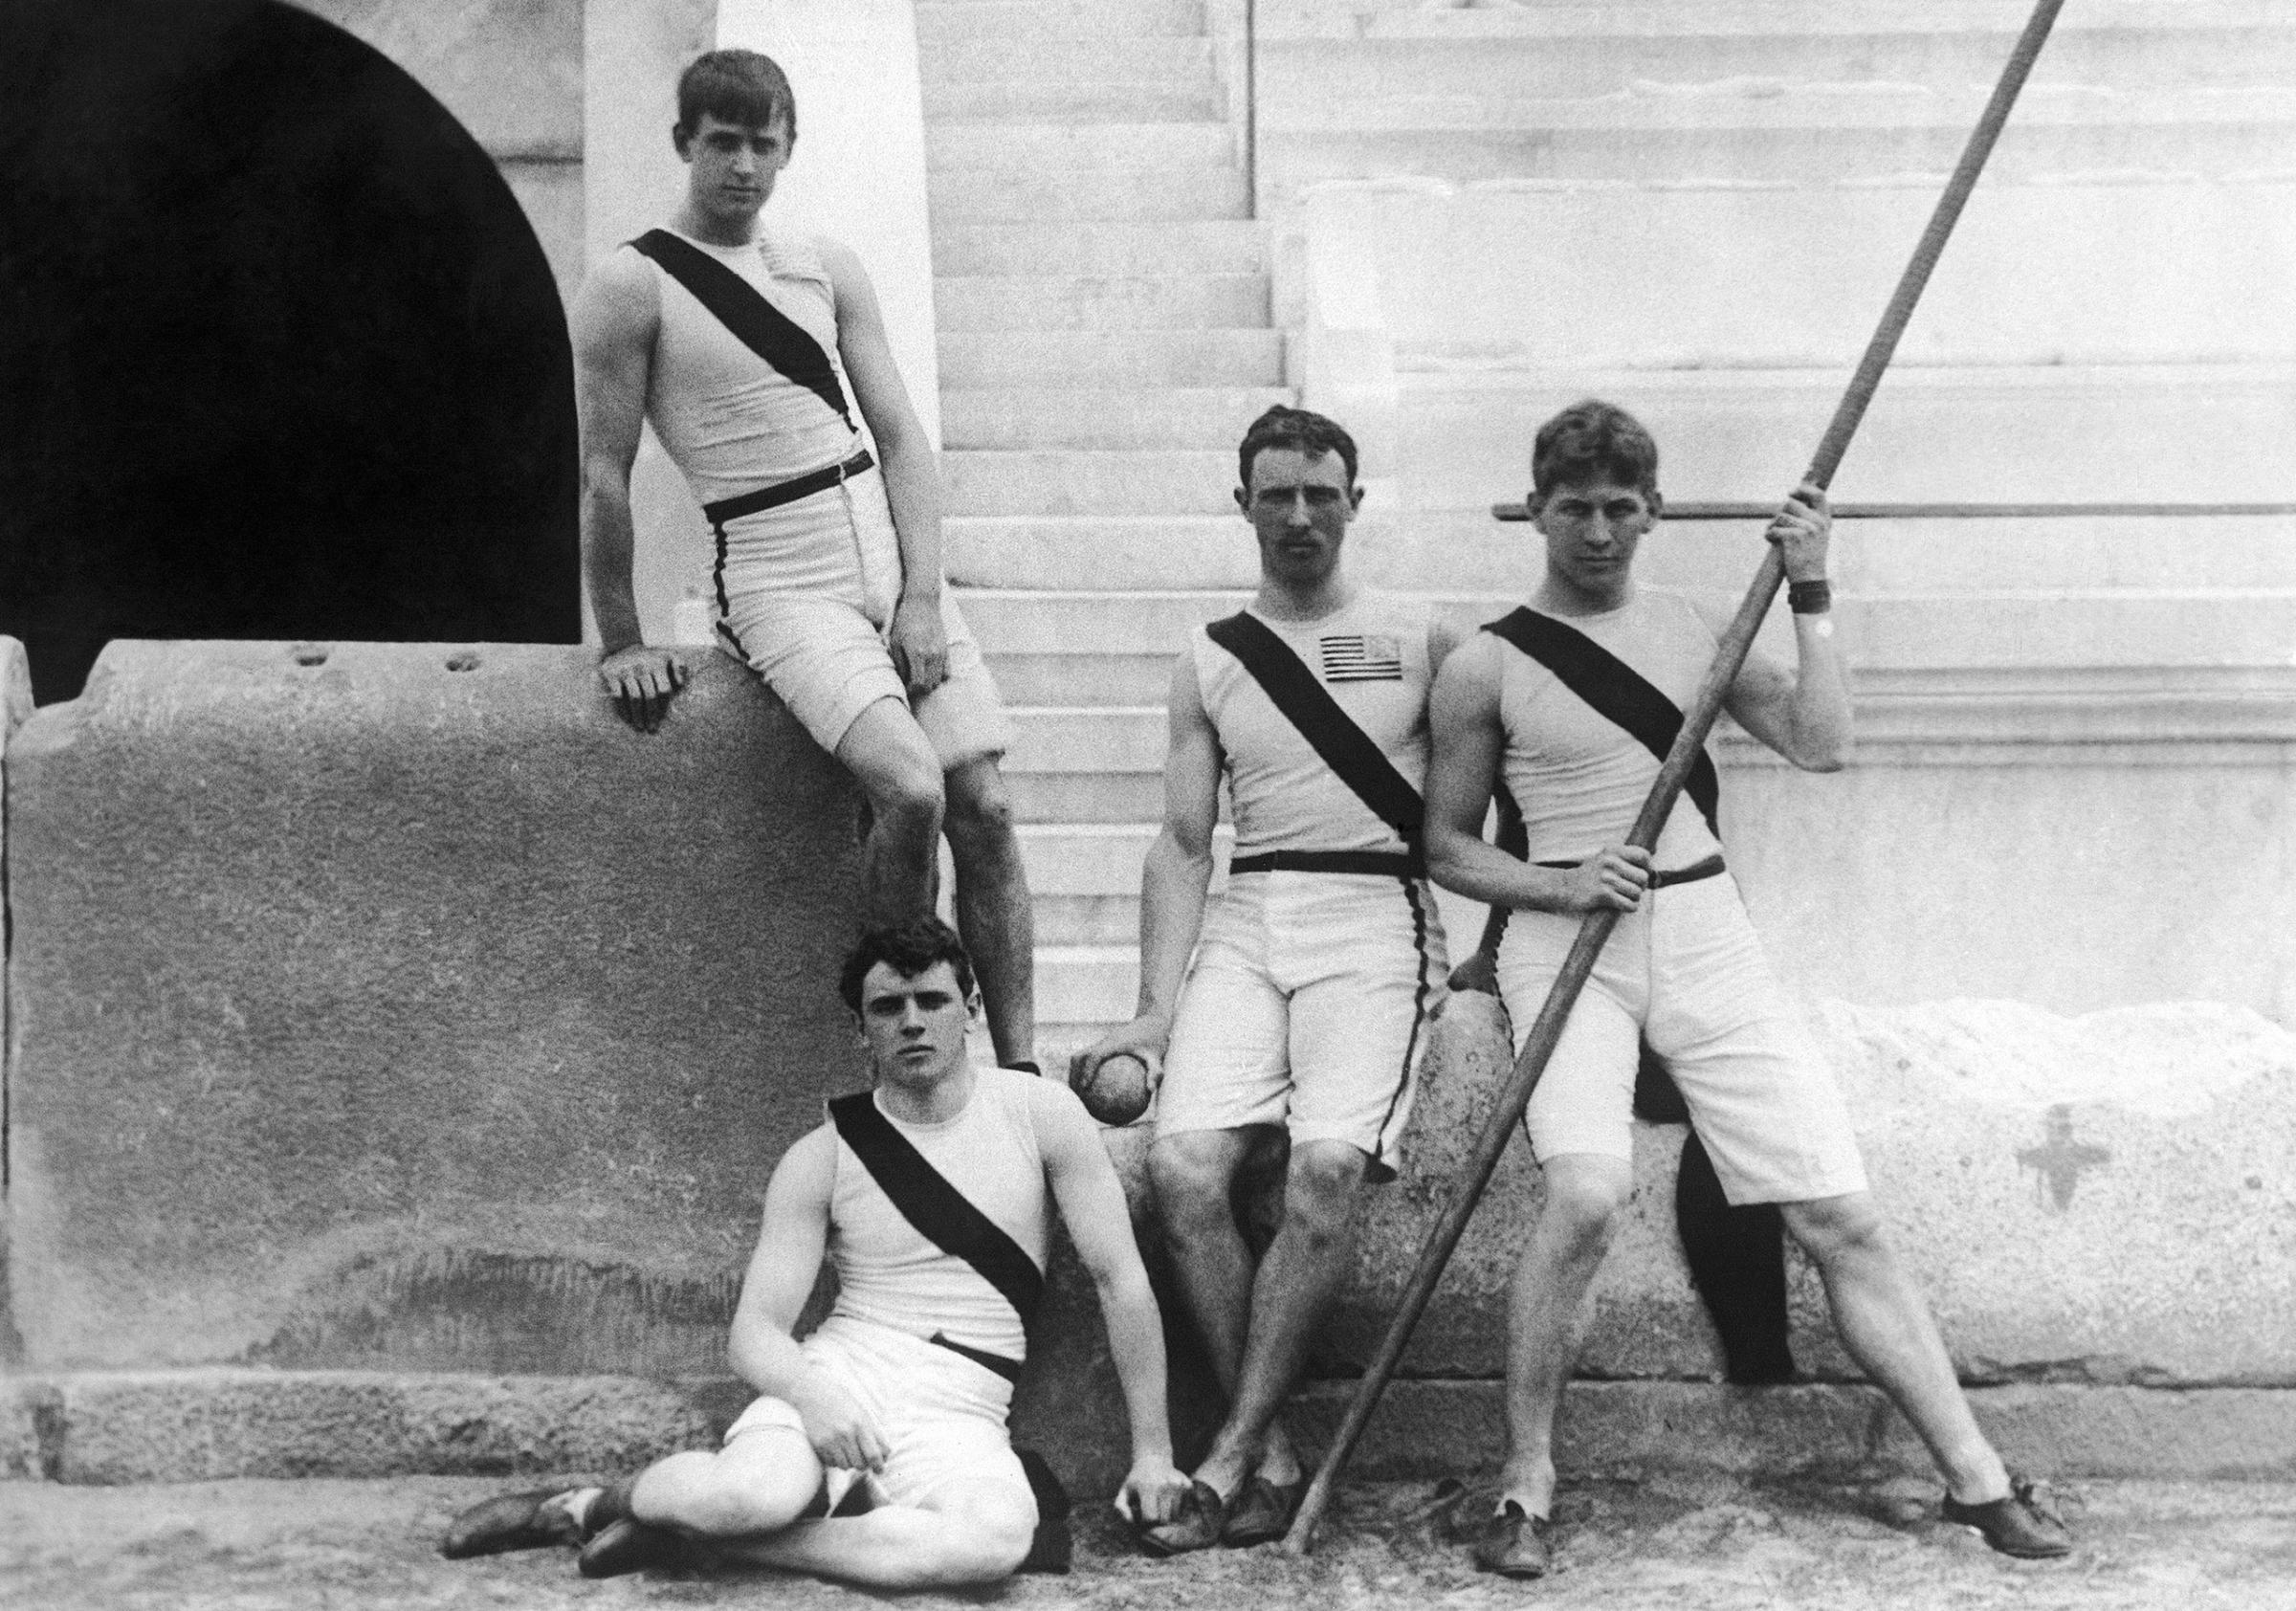 Members of the athletics team of the US Princeton University pose at the first modern International Summer Olympic Games held at the Panathinaiko Stadium in April 1896 in Athens, Greece. From left to right: Francis A. Lane, Herbert Jamison, Robert Garrett and Albert Tyler.